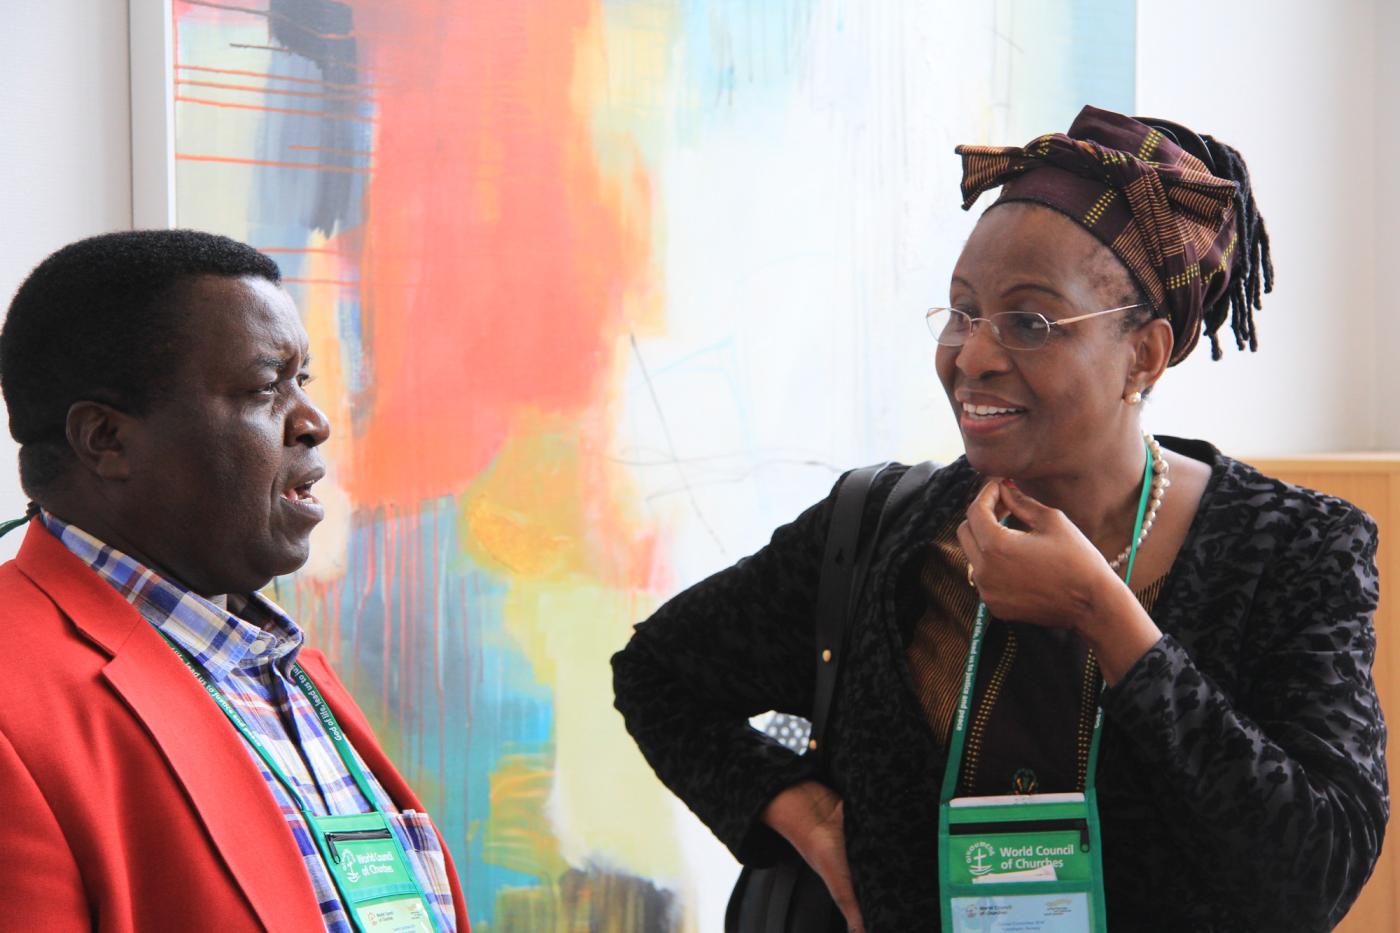 Dr Isabel Phiri in conversation with a Central Committee member. © Susanne Erlecke/EKD/WCC